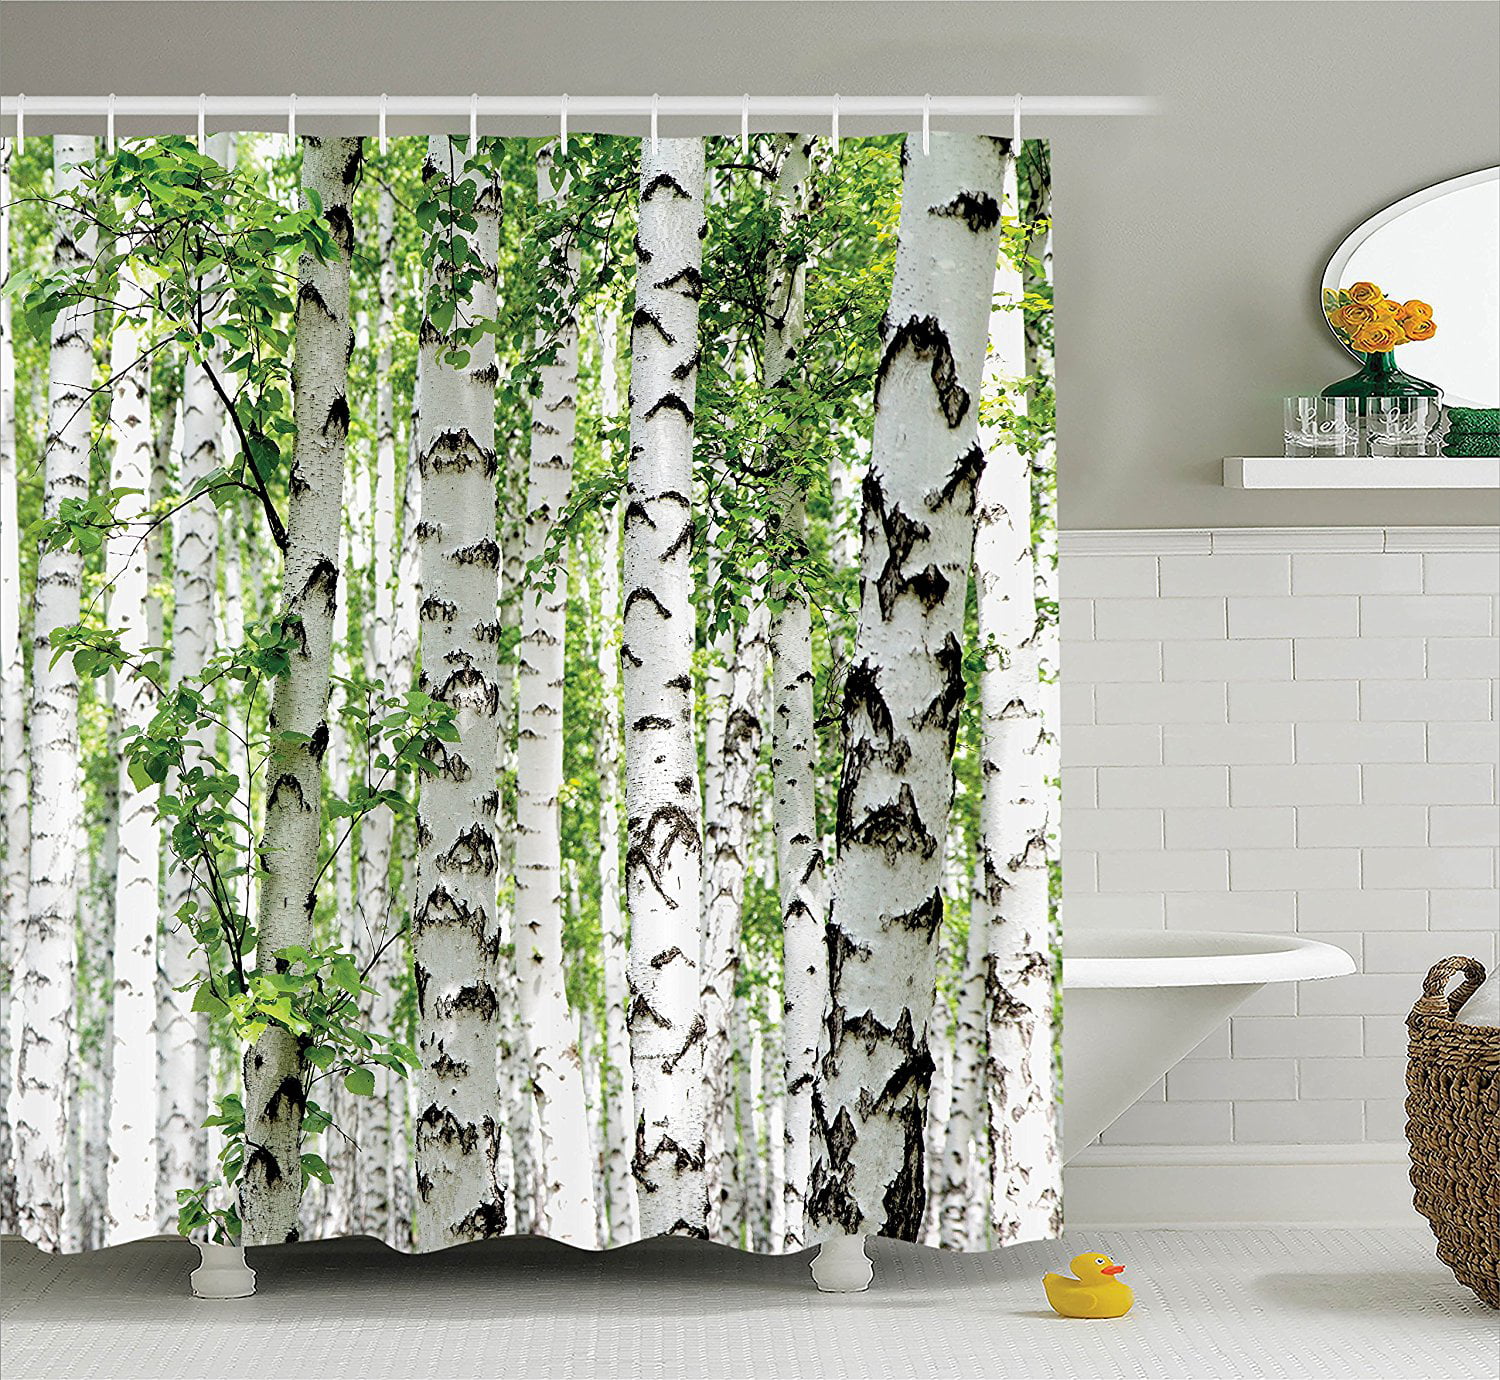 Tropical Plant Shower Curtain Thick Waterproof Bathroom Home Decor 12 Hooks LO 